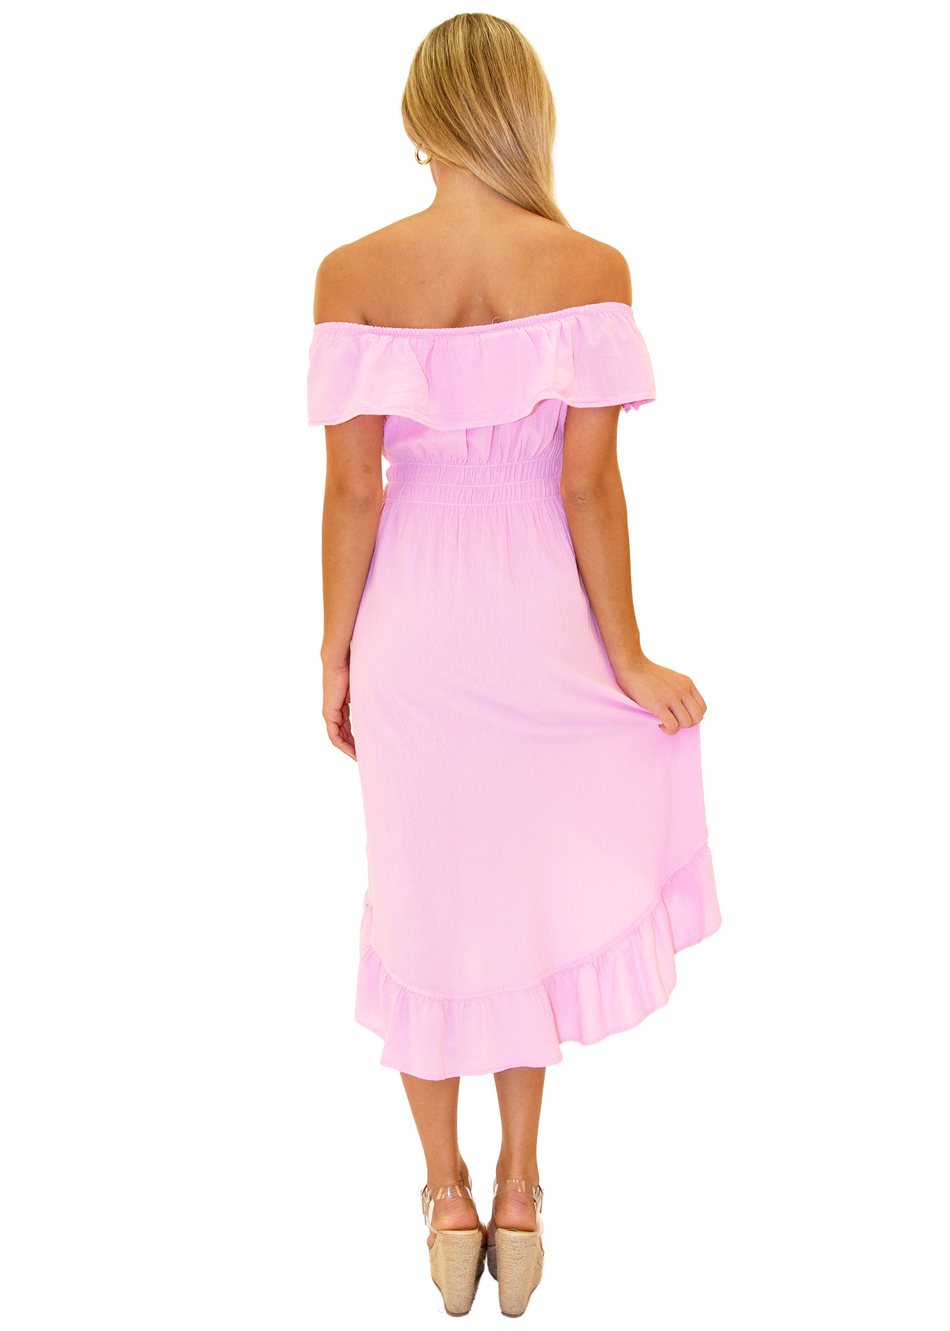 NW1083 - Pink Cotton Dress